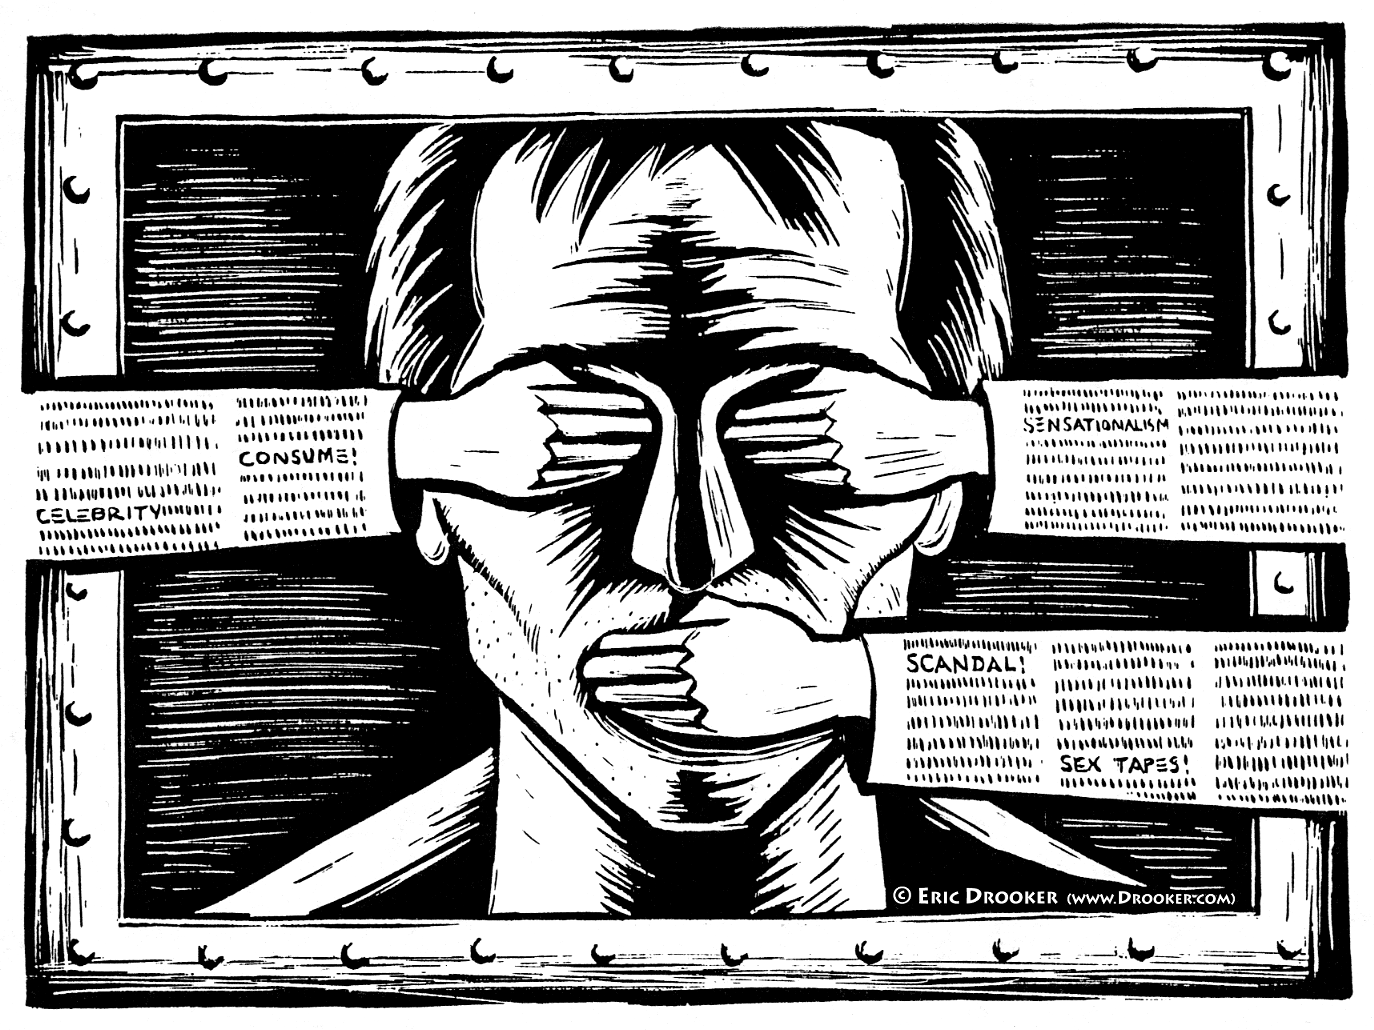 What are some laws governing censorship in America?